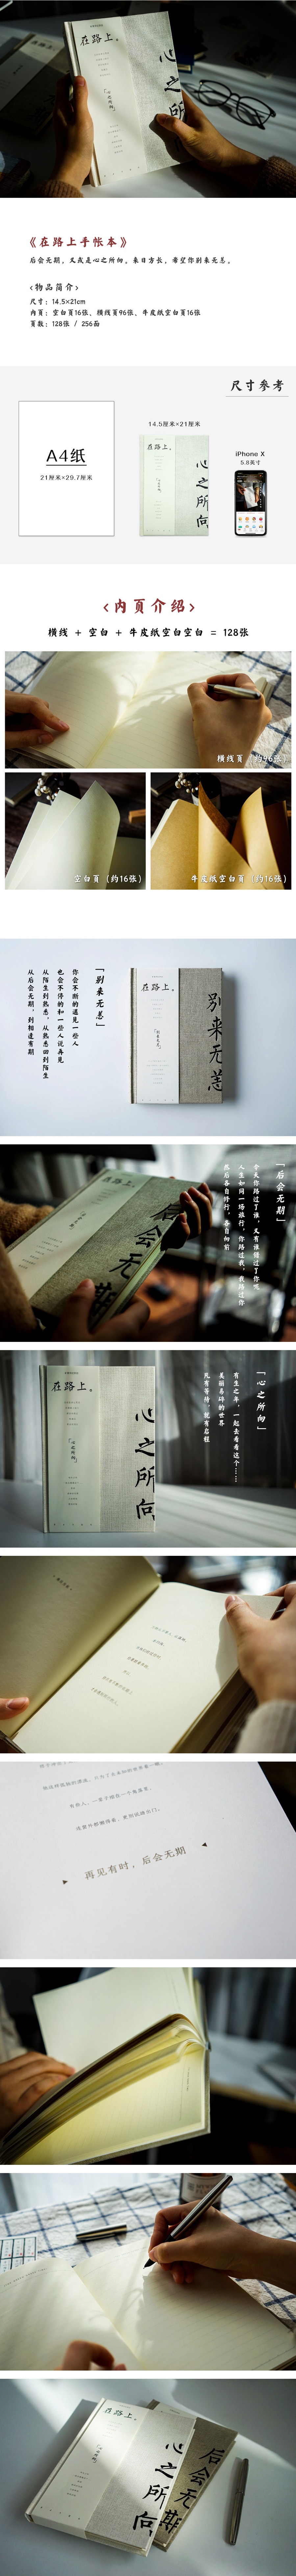 Chinese-style Notebook The coming days would be long 500g